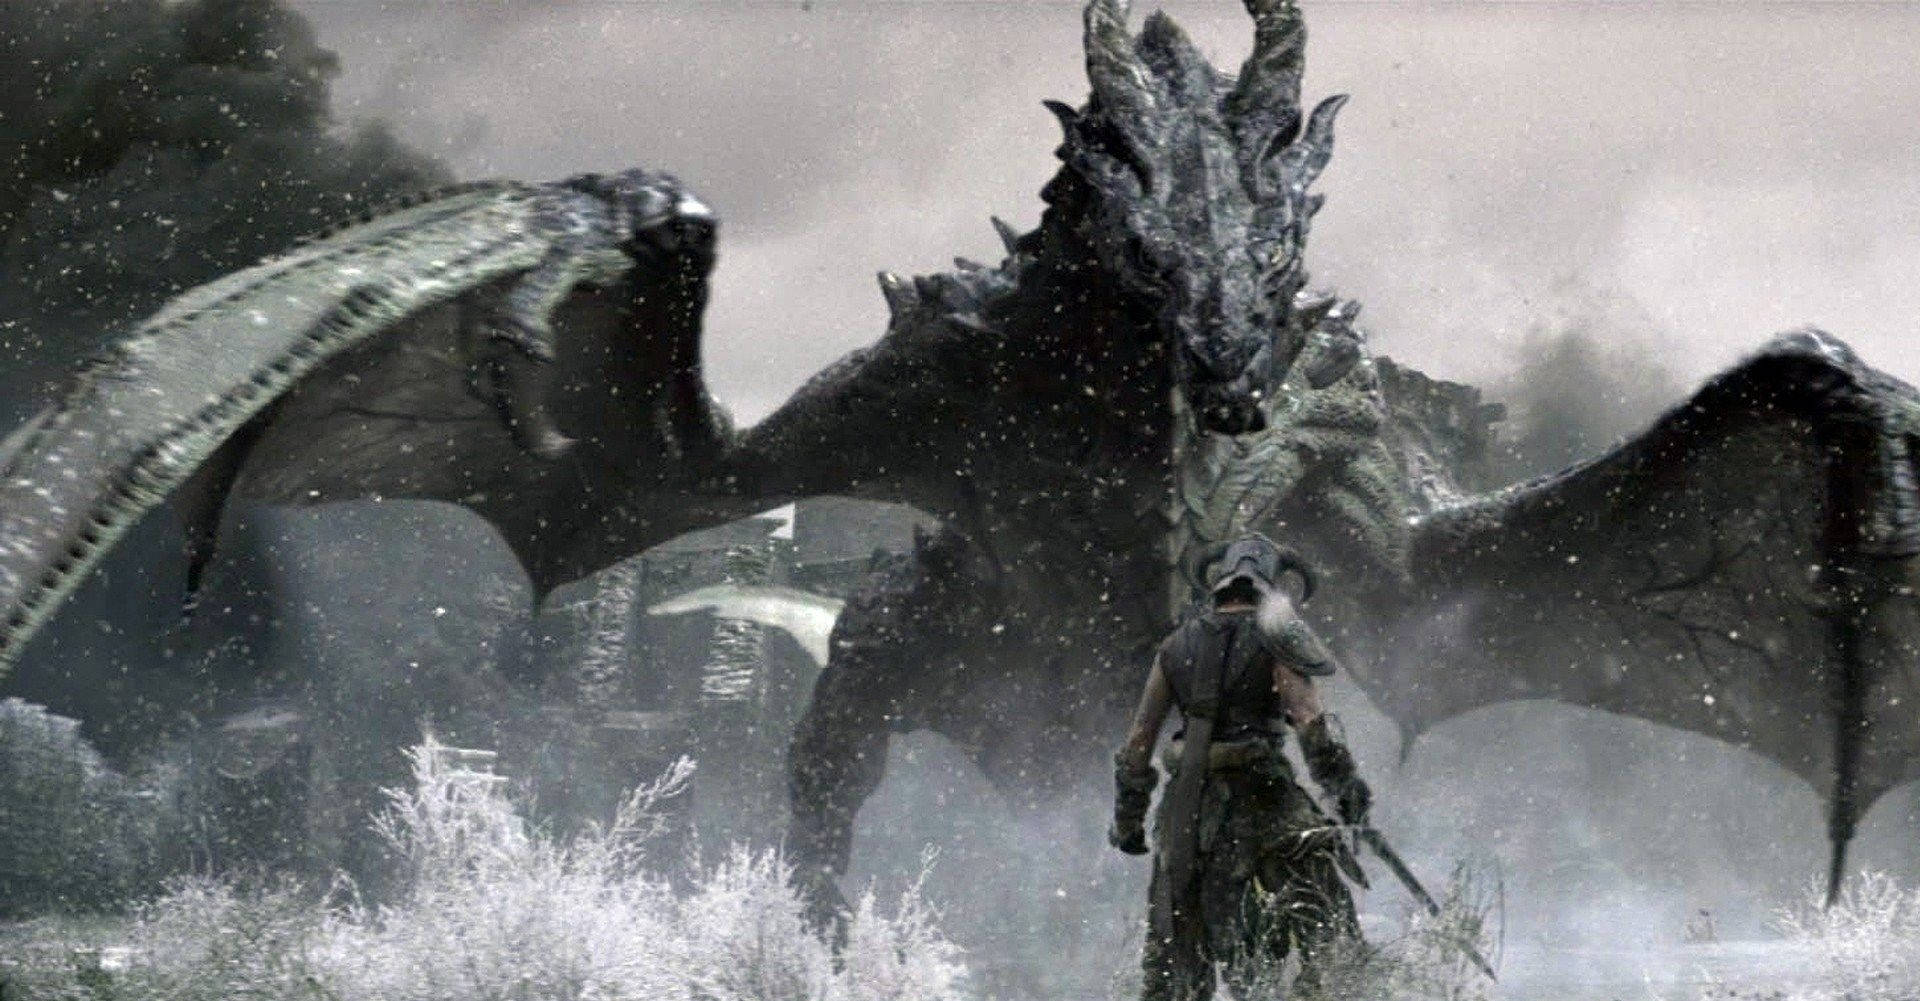 Image  Travel Through an Epic Fantasy World with Skyrim Ultra HD Wallpaper